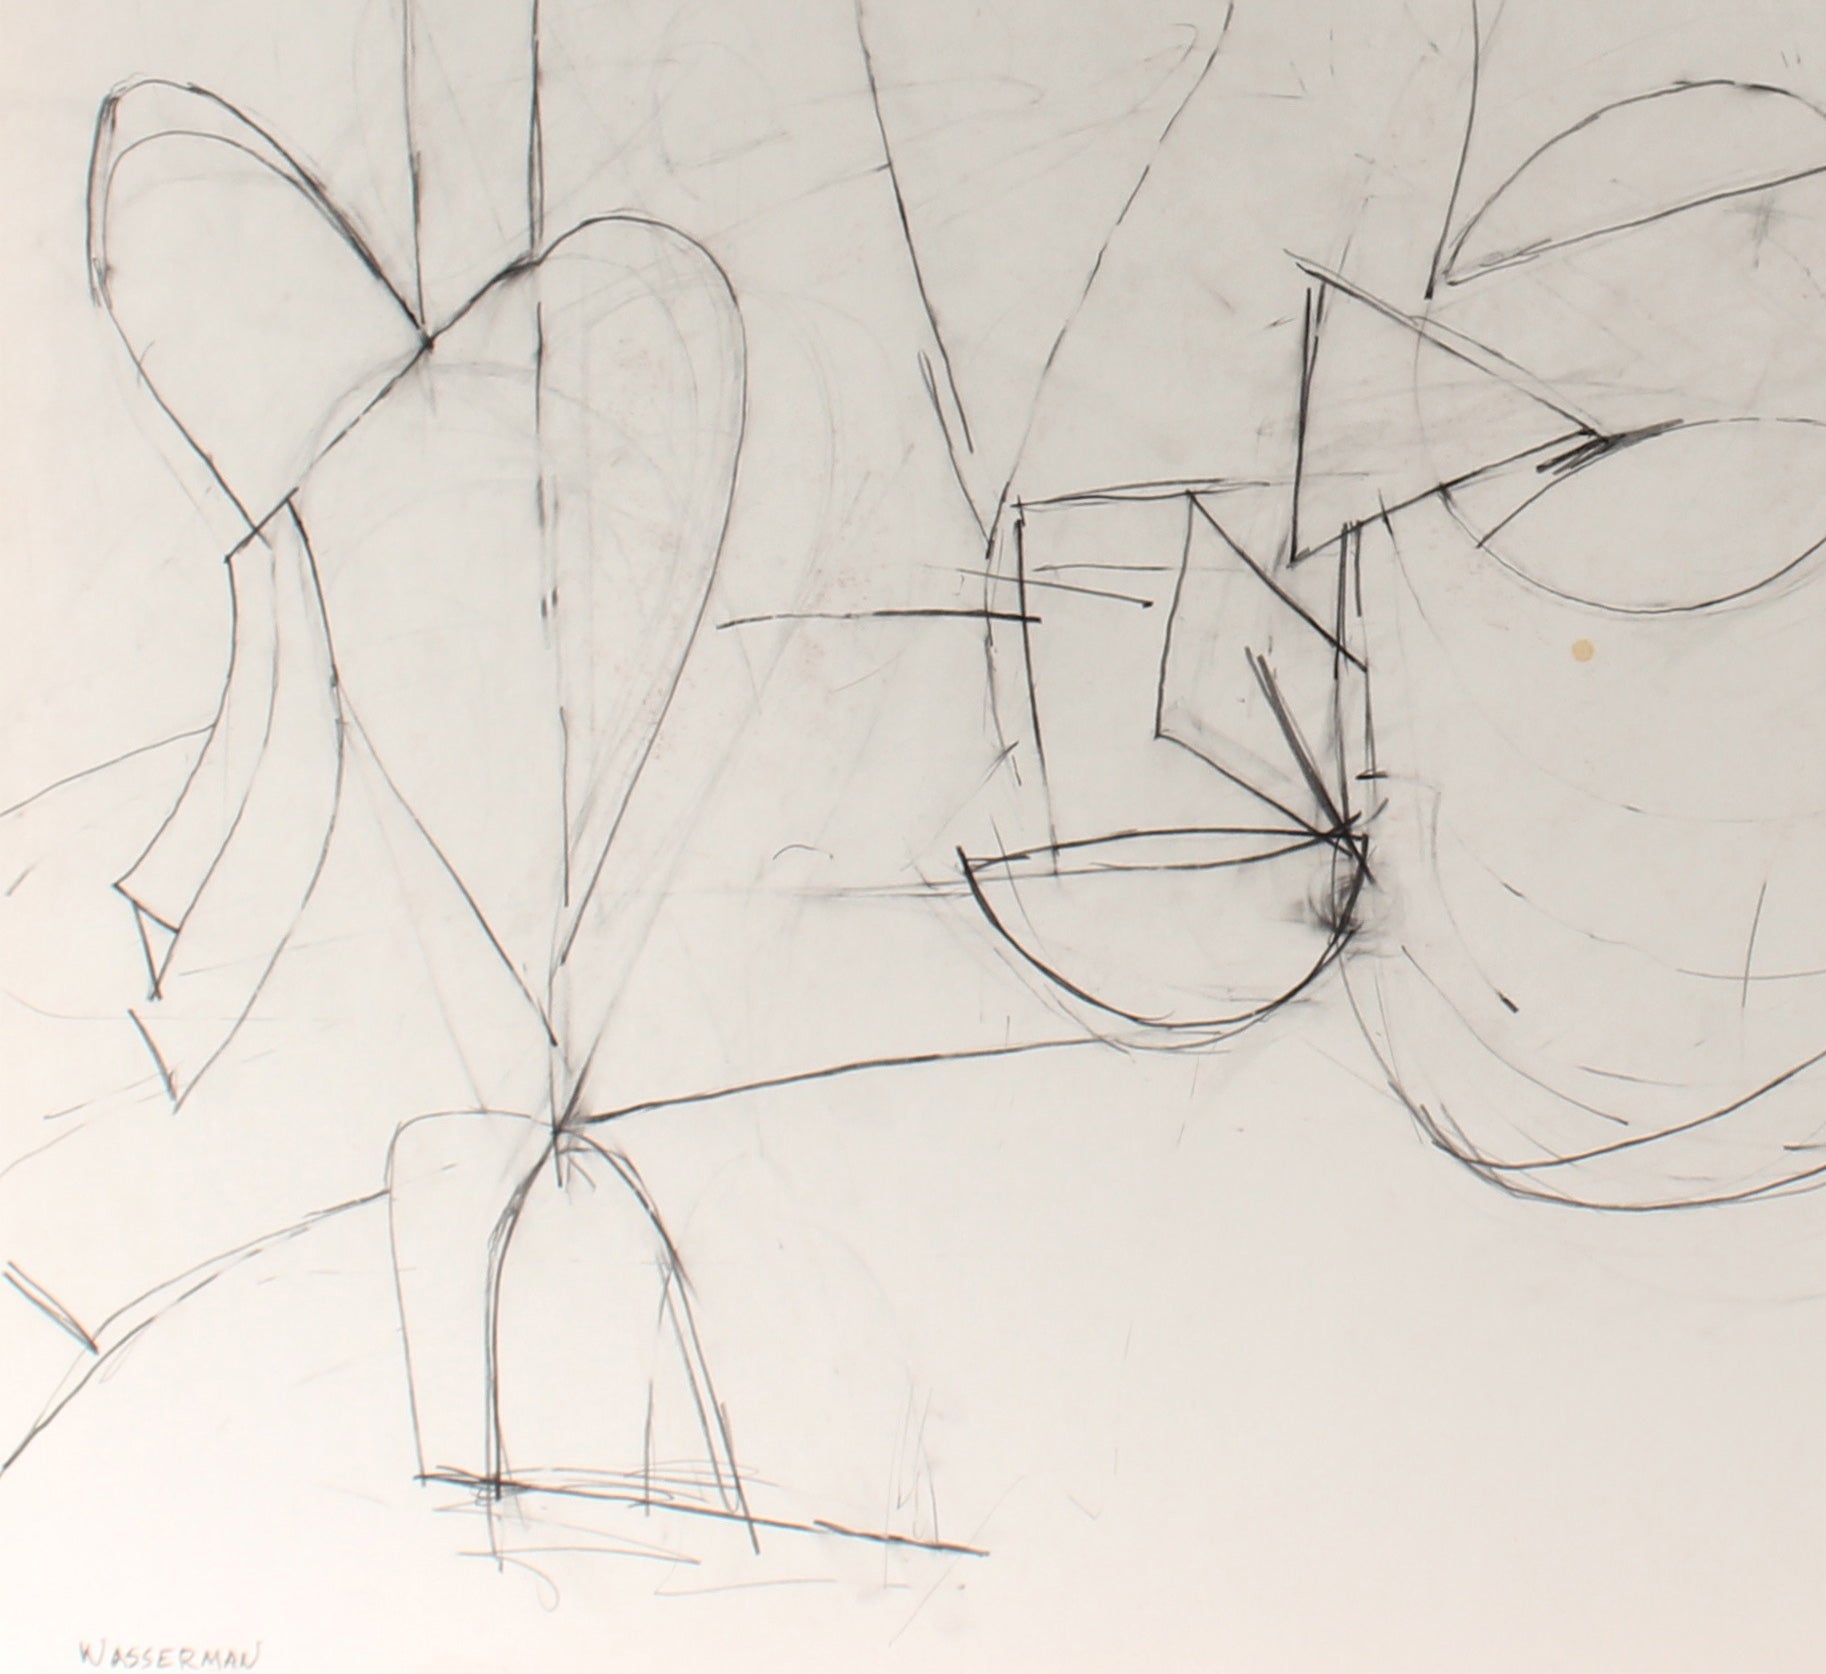 Minimalist Abstracted Figures<br>1998 Graphite<br><br>#88255